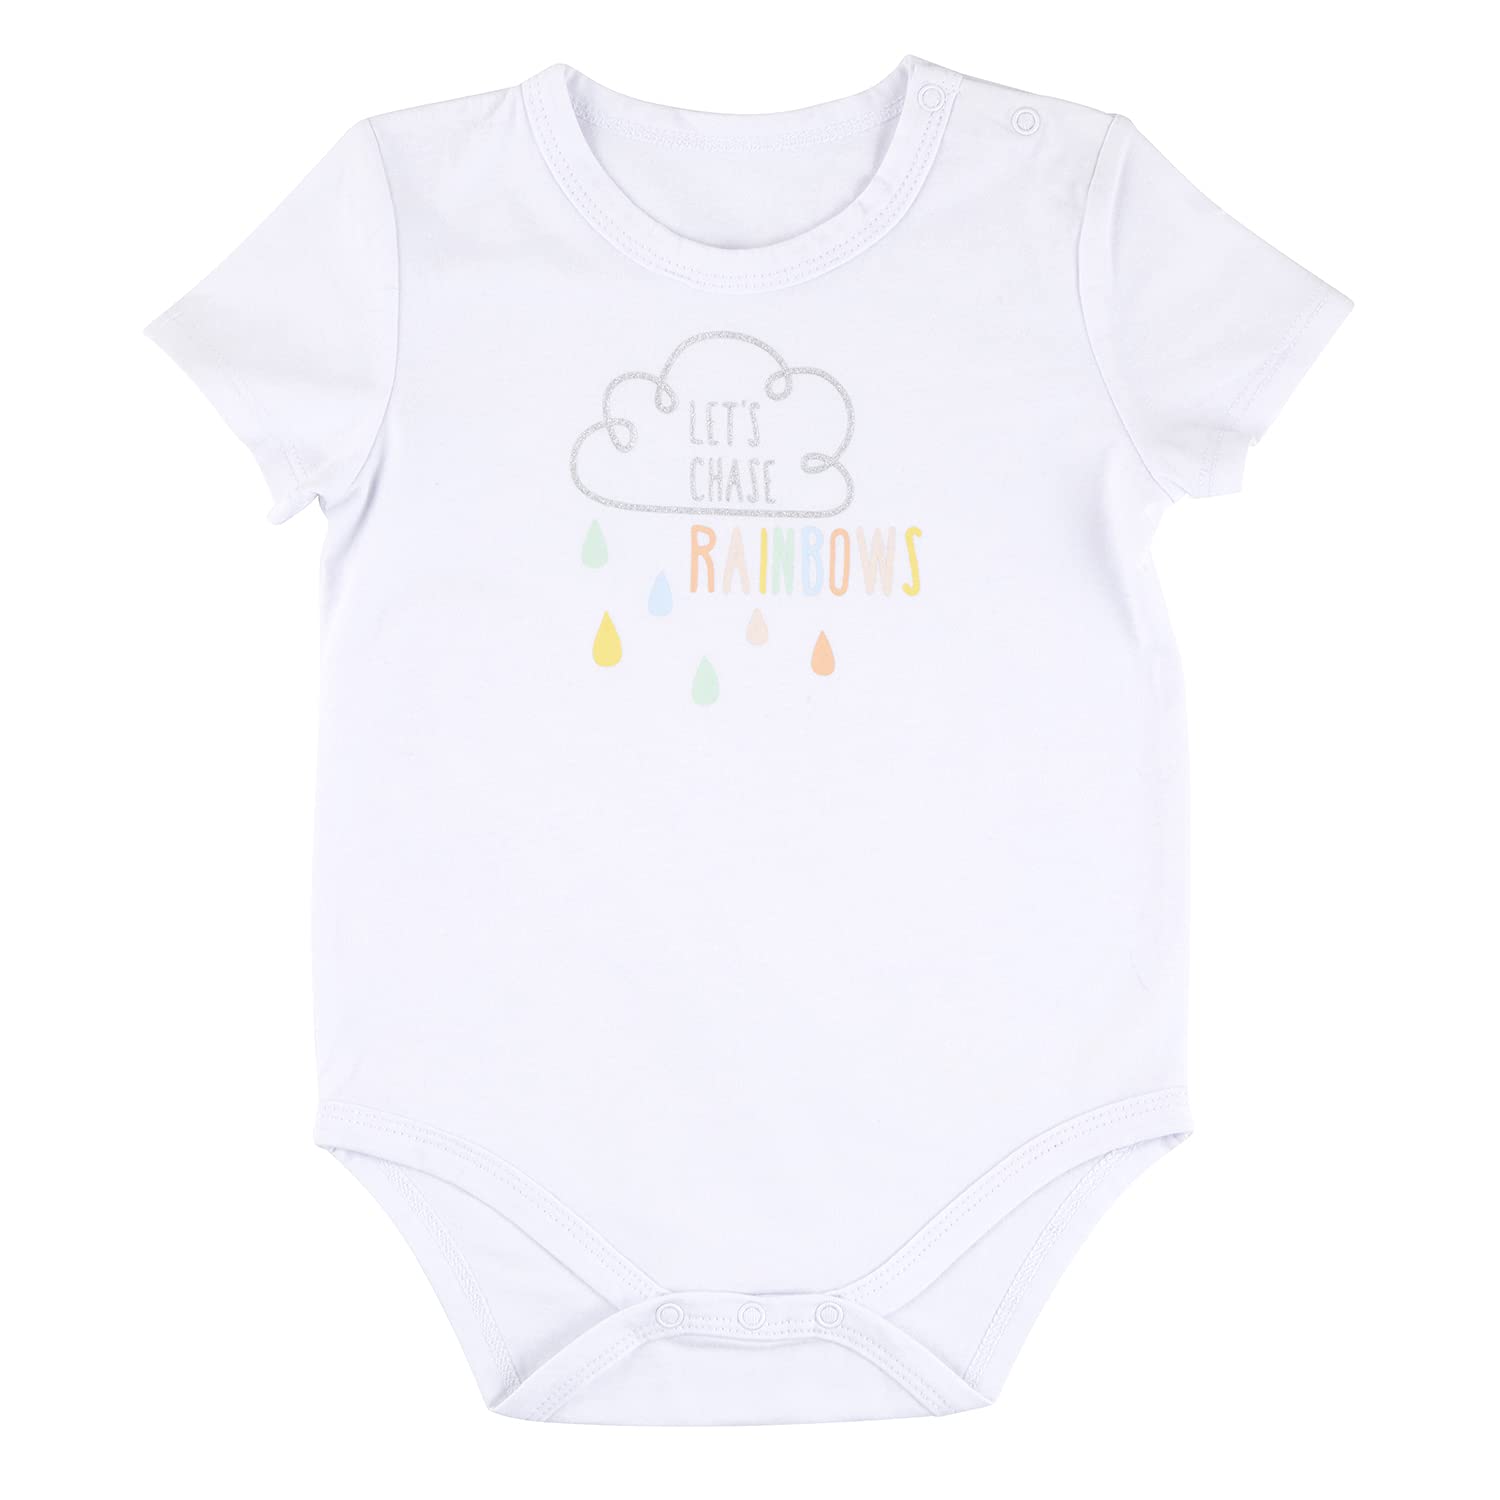 Let's Chase Rainbows Snapshirt, Fits 6-12 Months